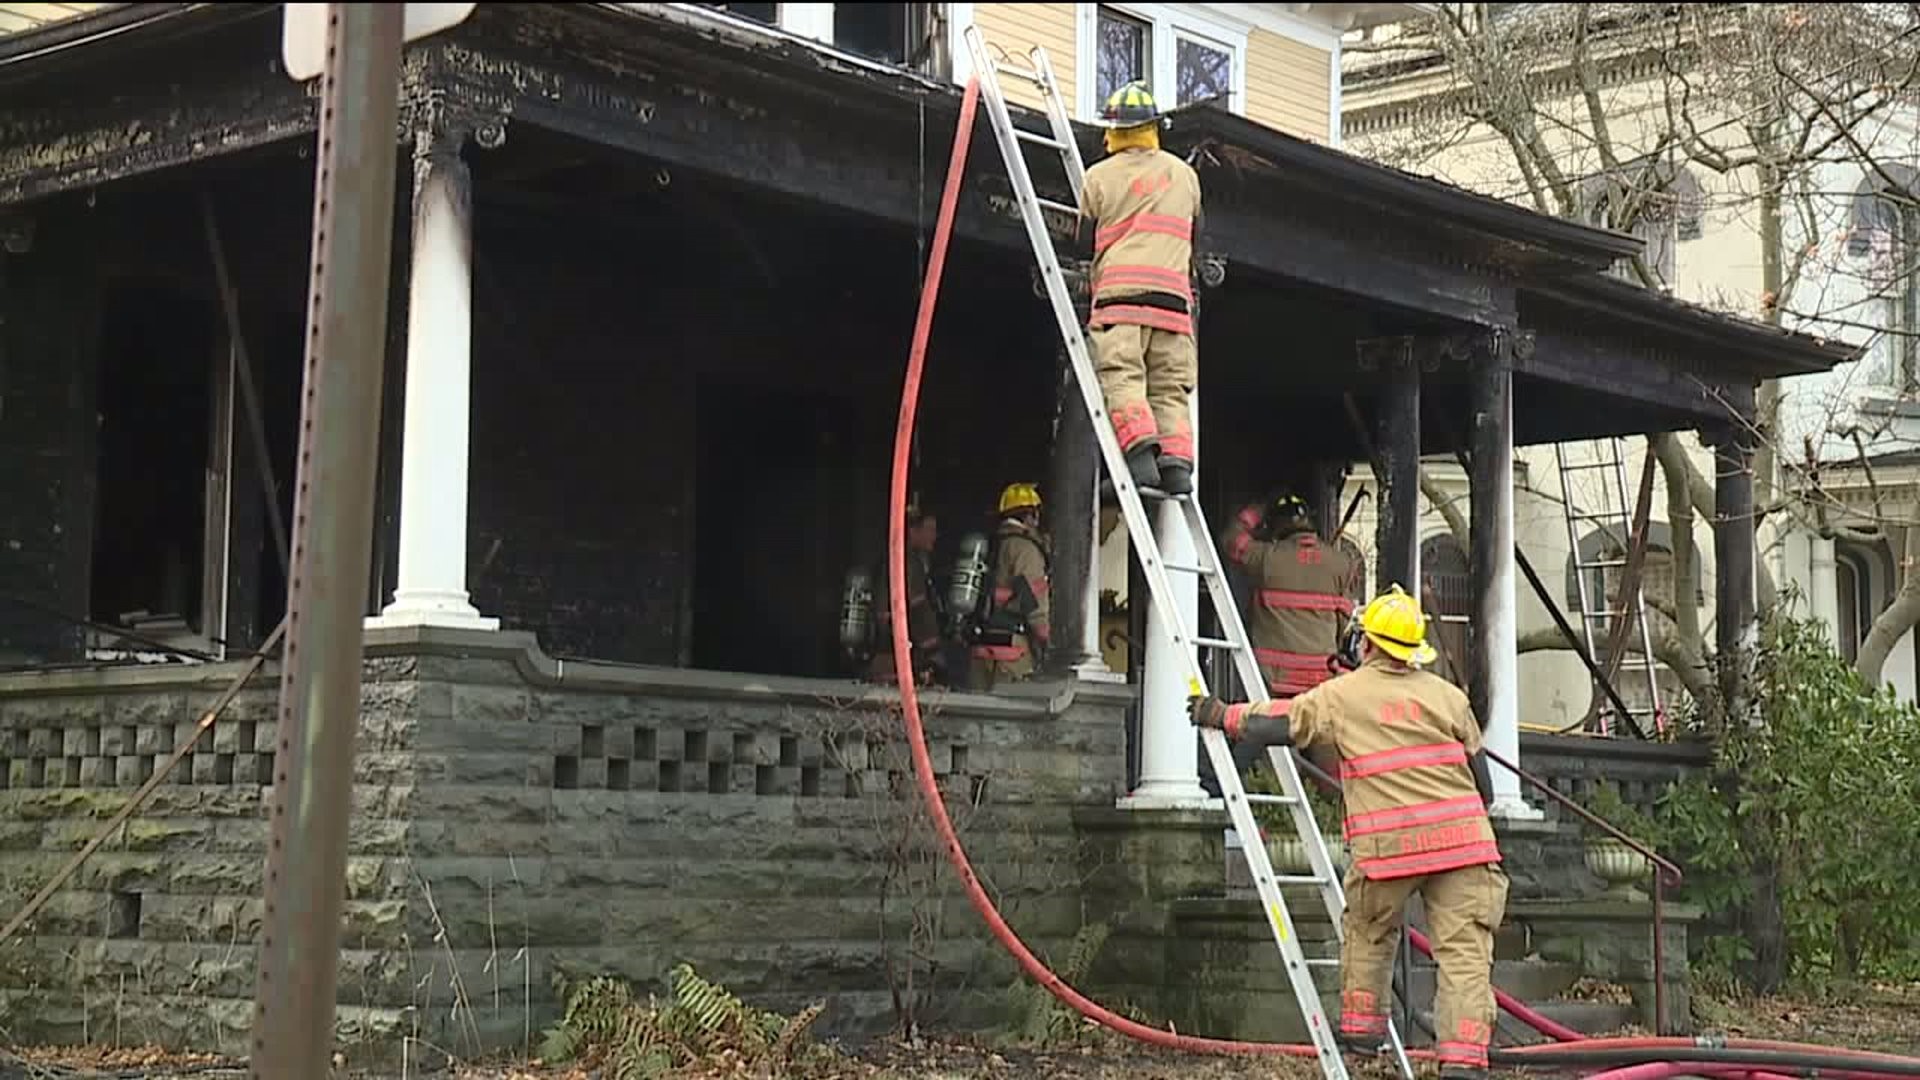 Electrical Problem Causes House Fire in Bloomsburg